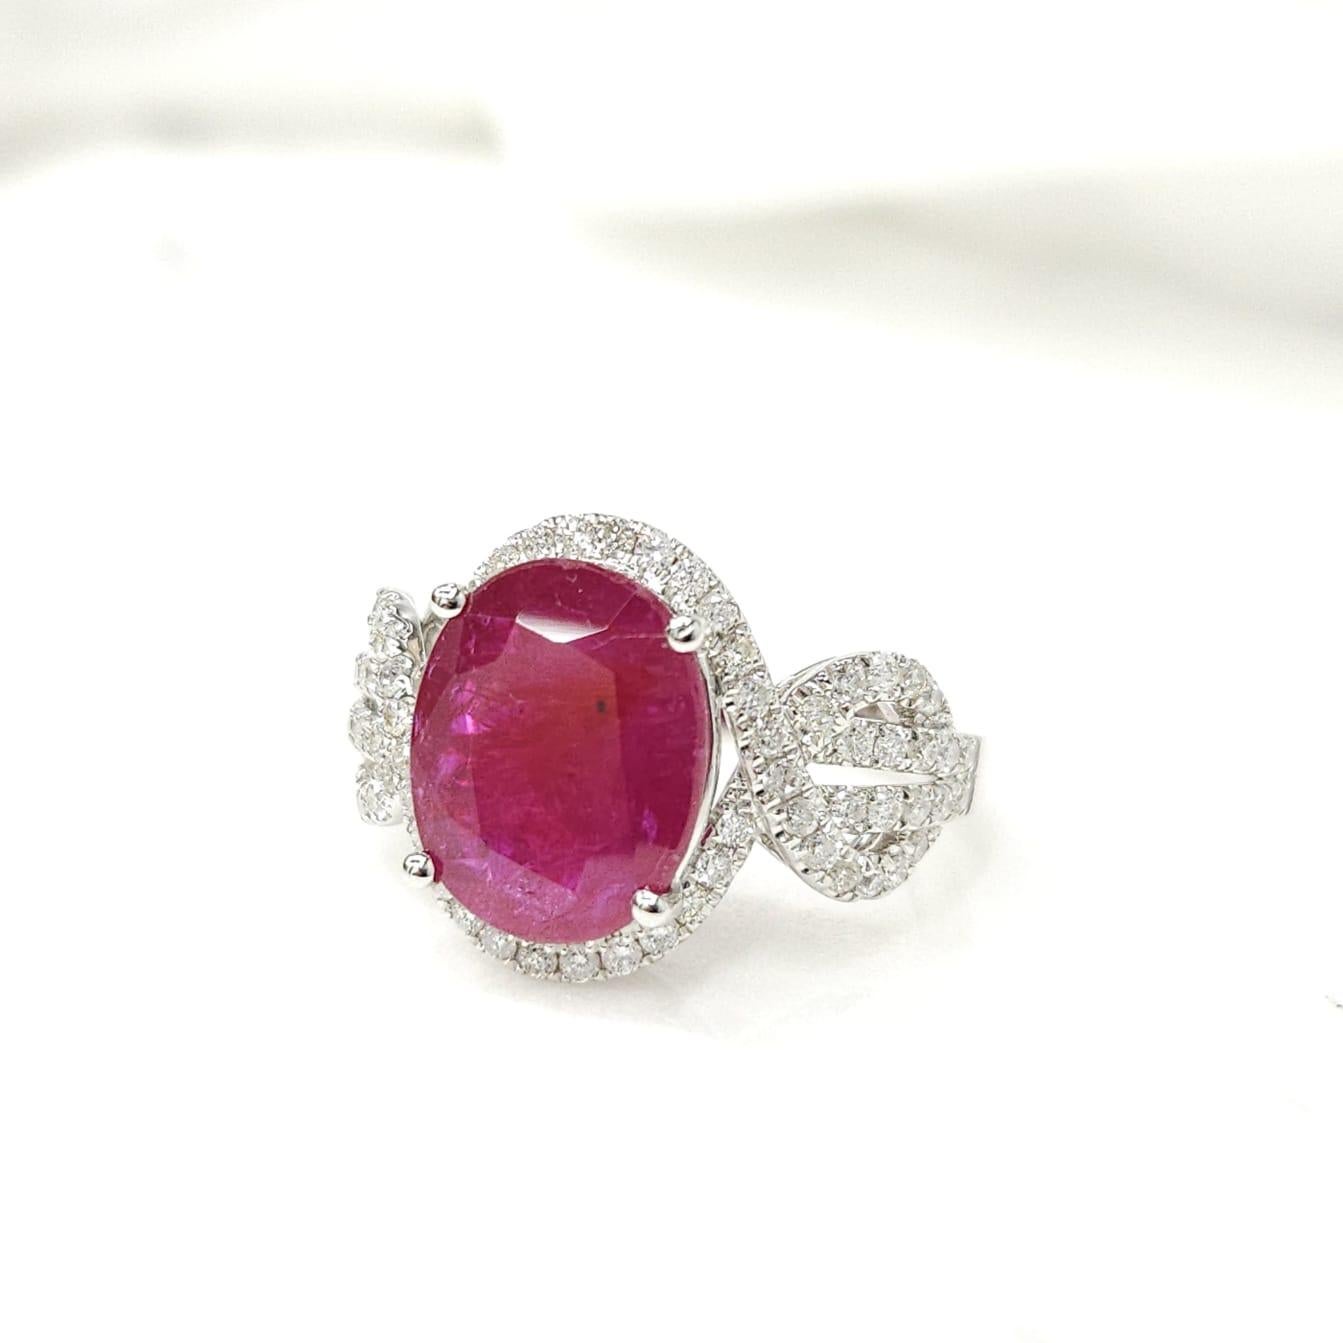 Oval Cut IGI Certified 4.12 Carat Ruby & Diamond Ring in 18K White Gold For Sale